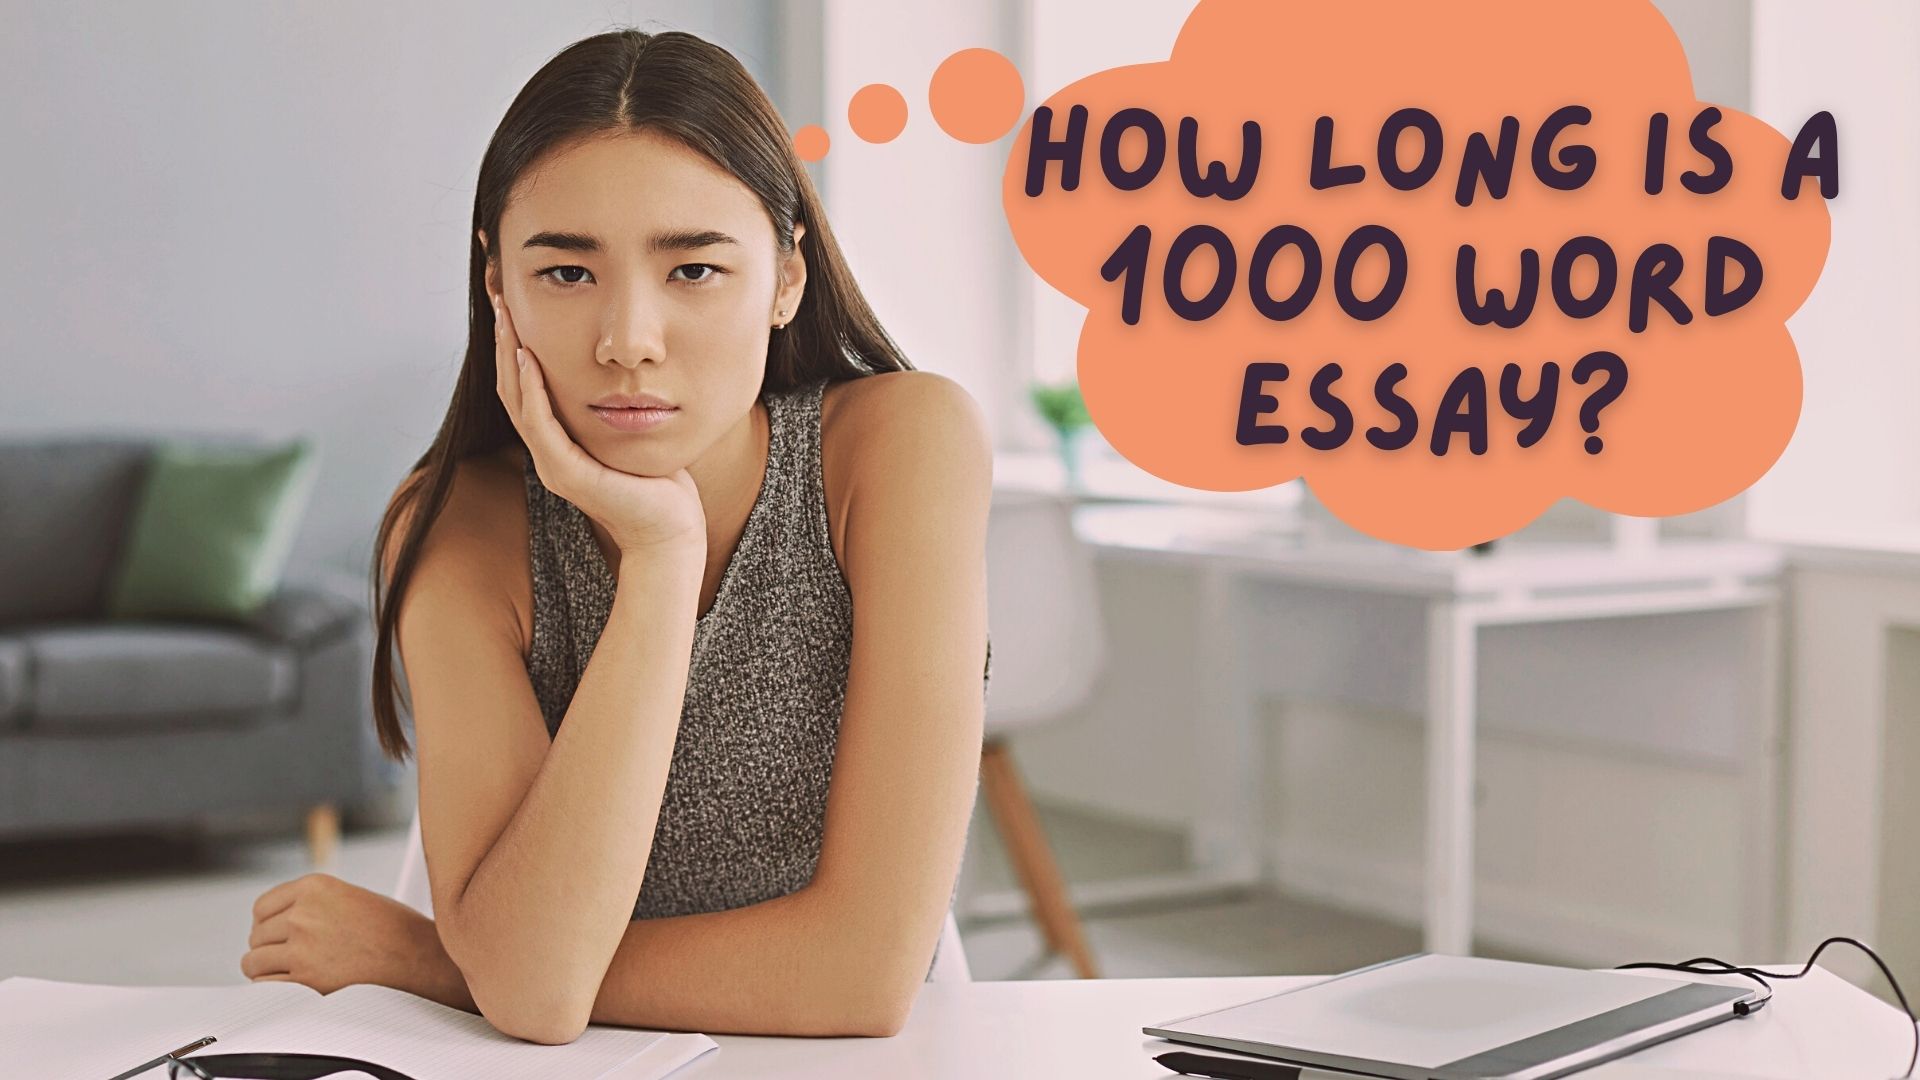 How Long Is A 1000 Word Essay And How To Write One?